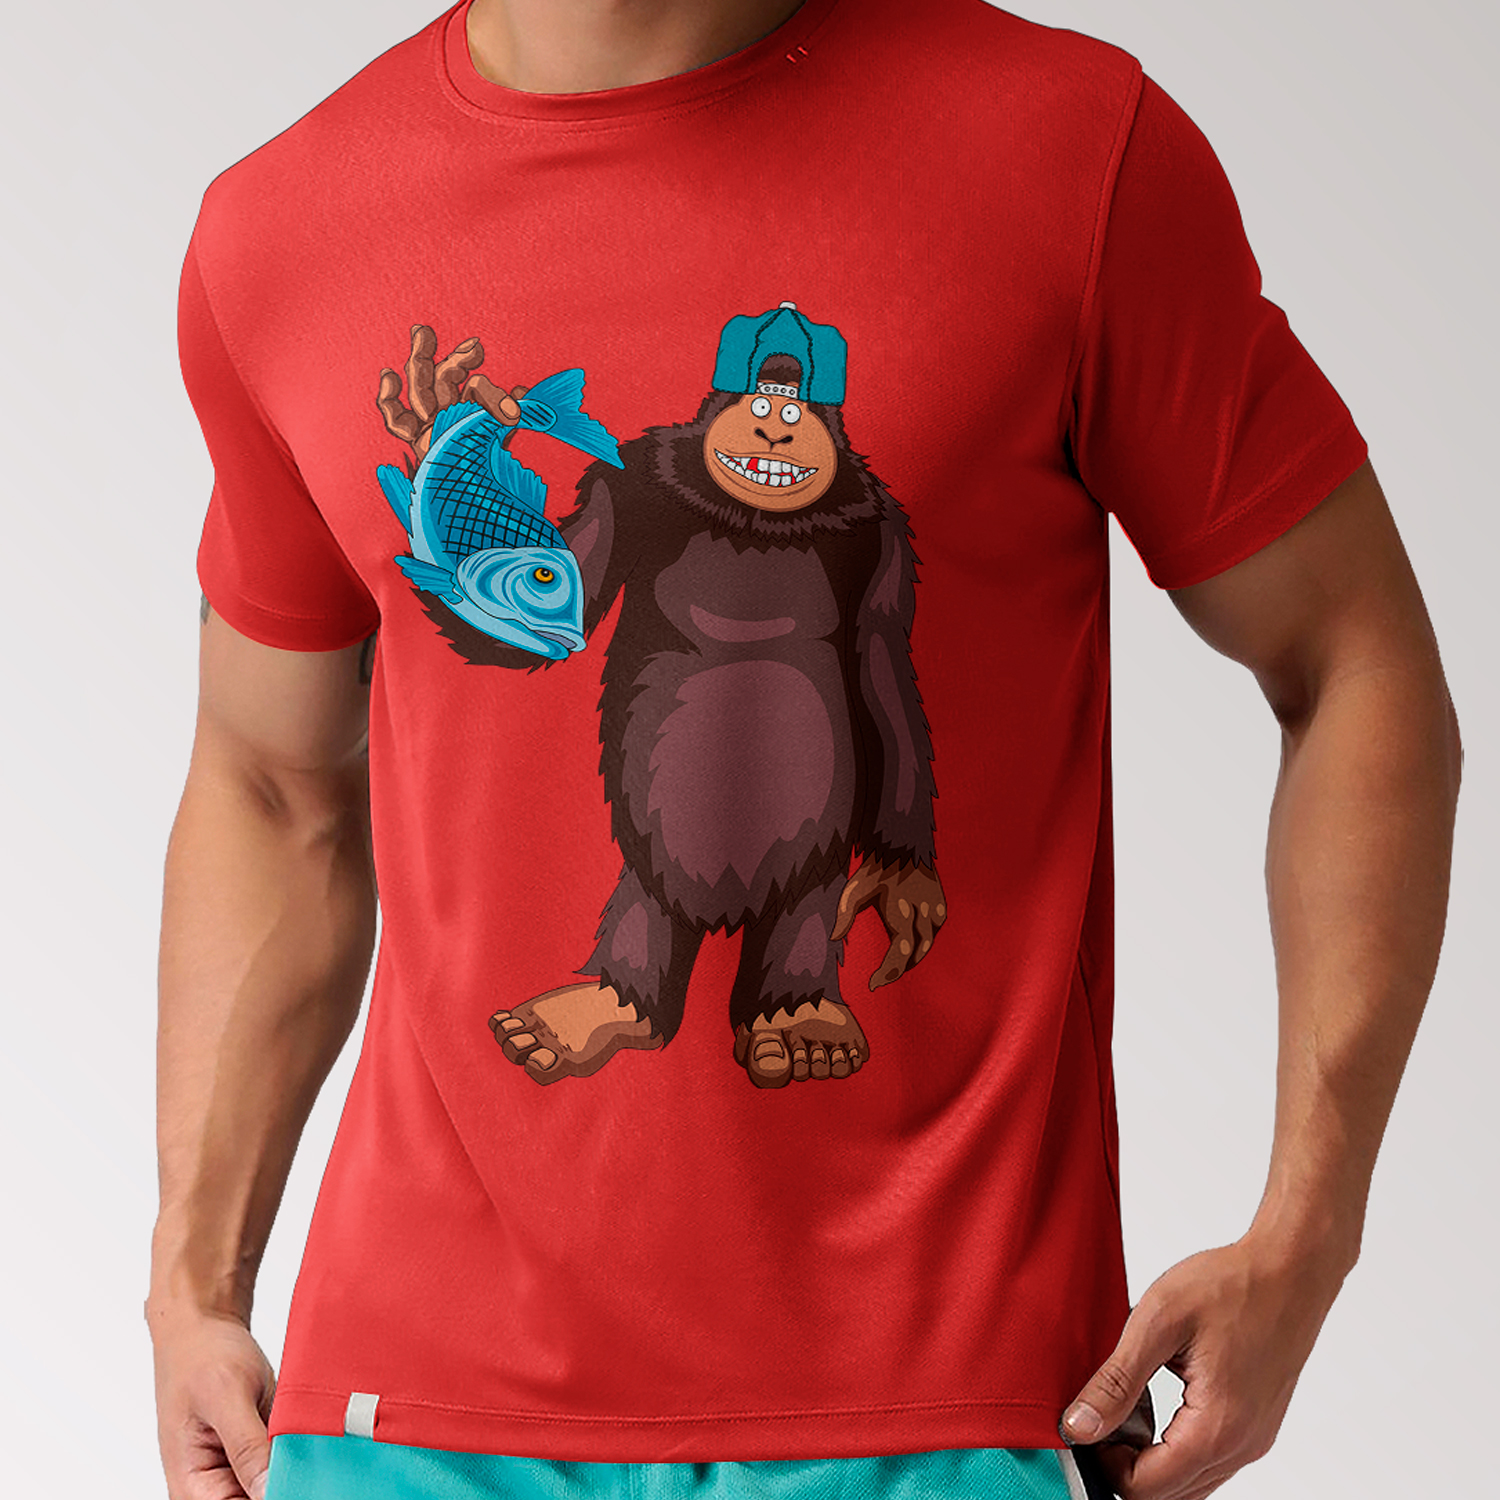 Man wearing a red shirt with a monkey on it.